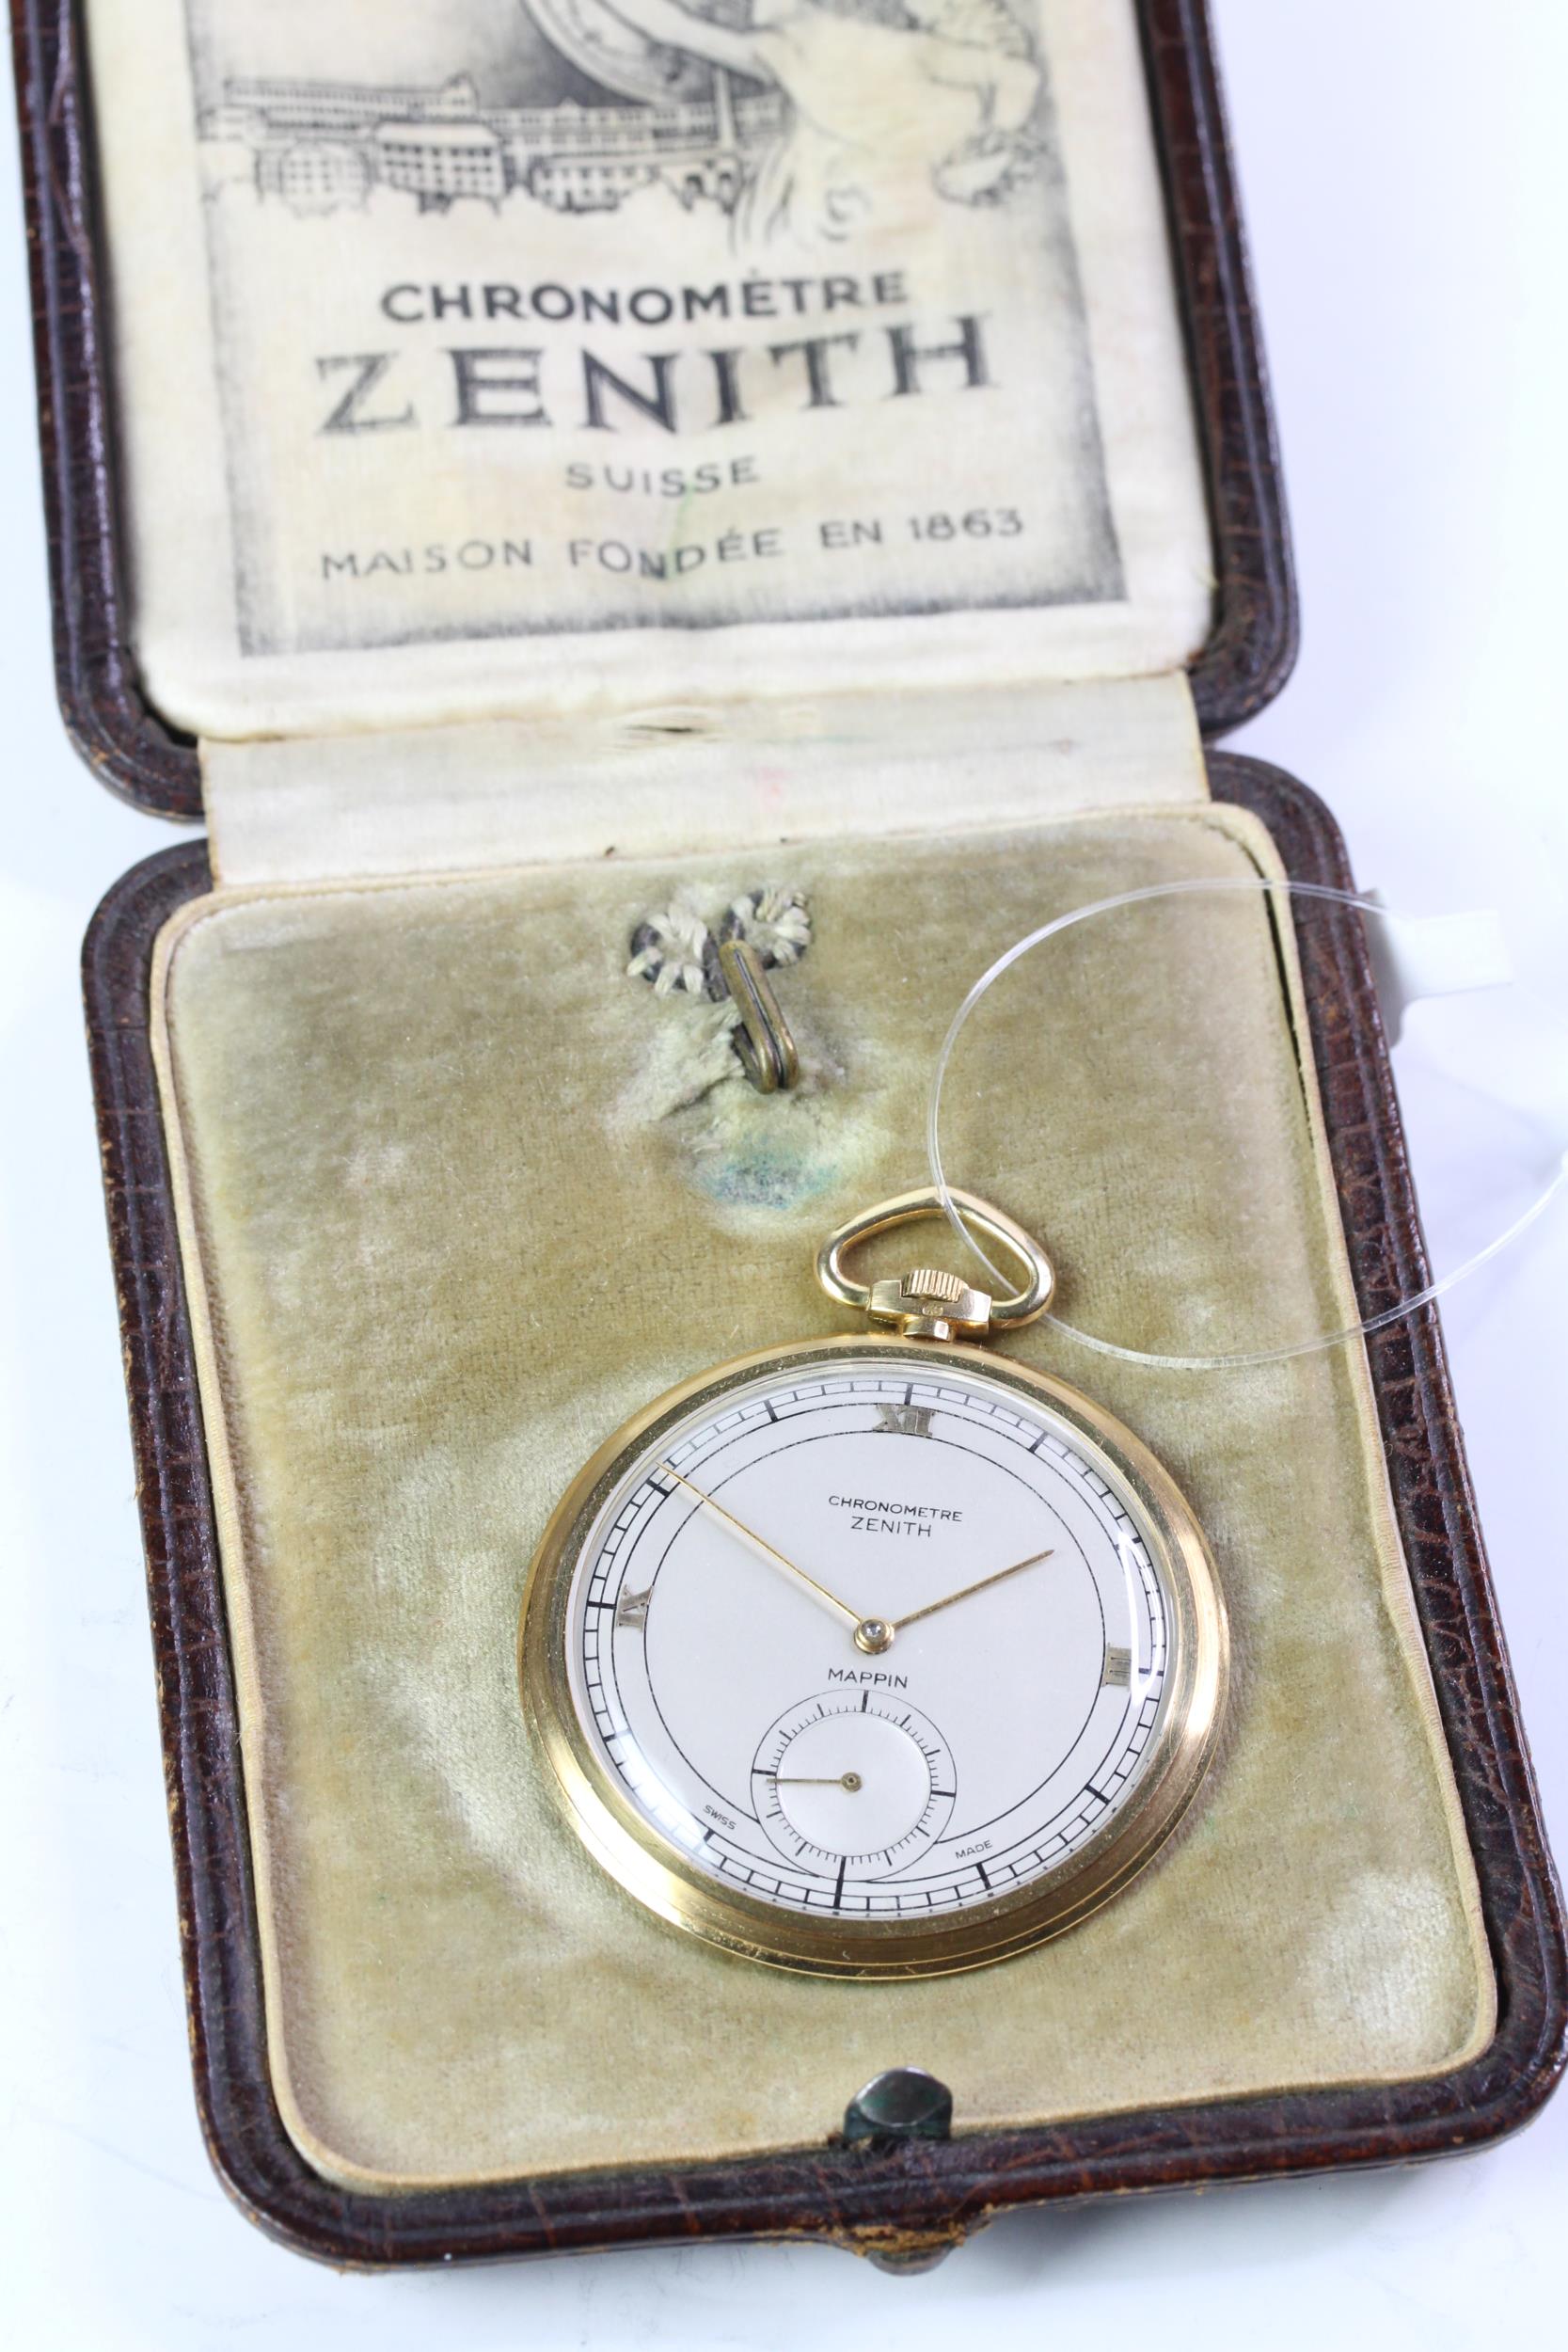 FINE AND RARE 18CT ZENITH MAPPIN DIAL CHRONOMETRE RASOR THIN POCKET WATCH, silvered dial, gold Roman